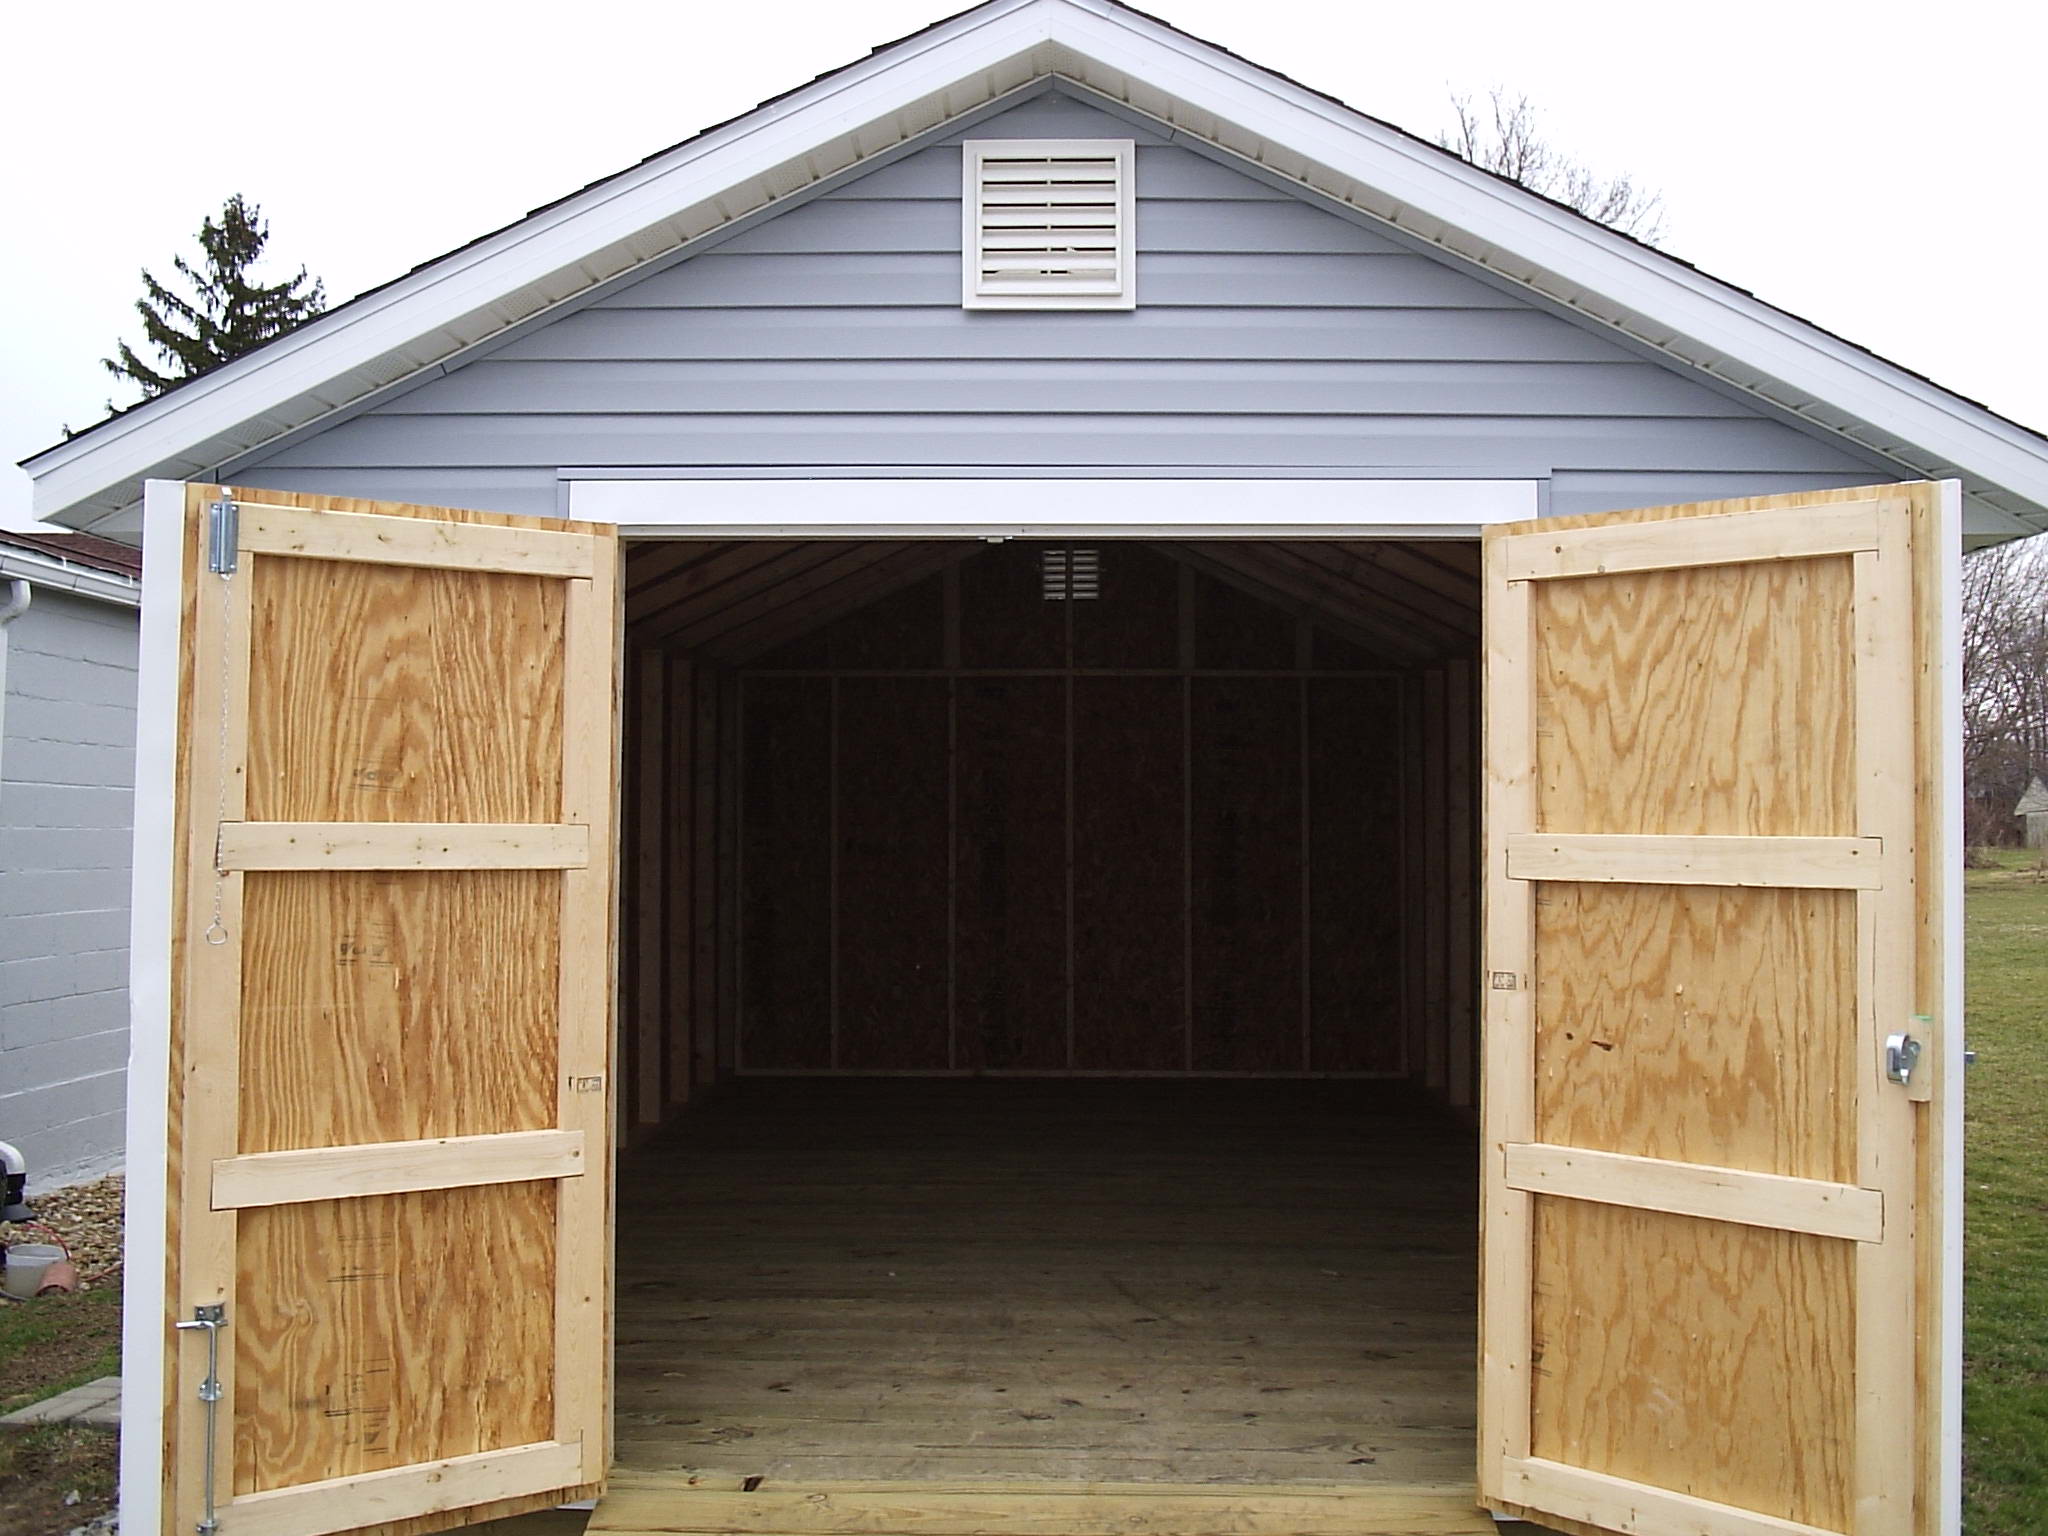 How To Make Shed Doors From Plywood How To Build A Shed Door From ...